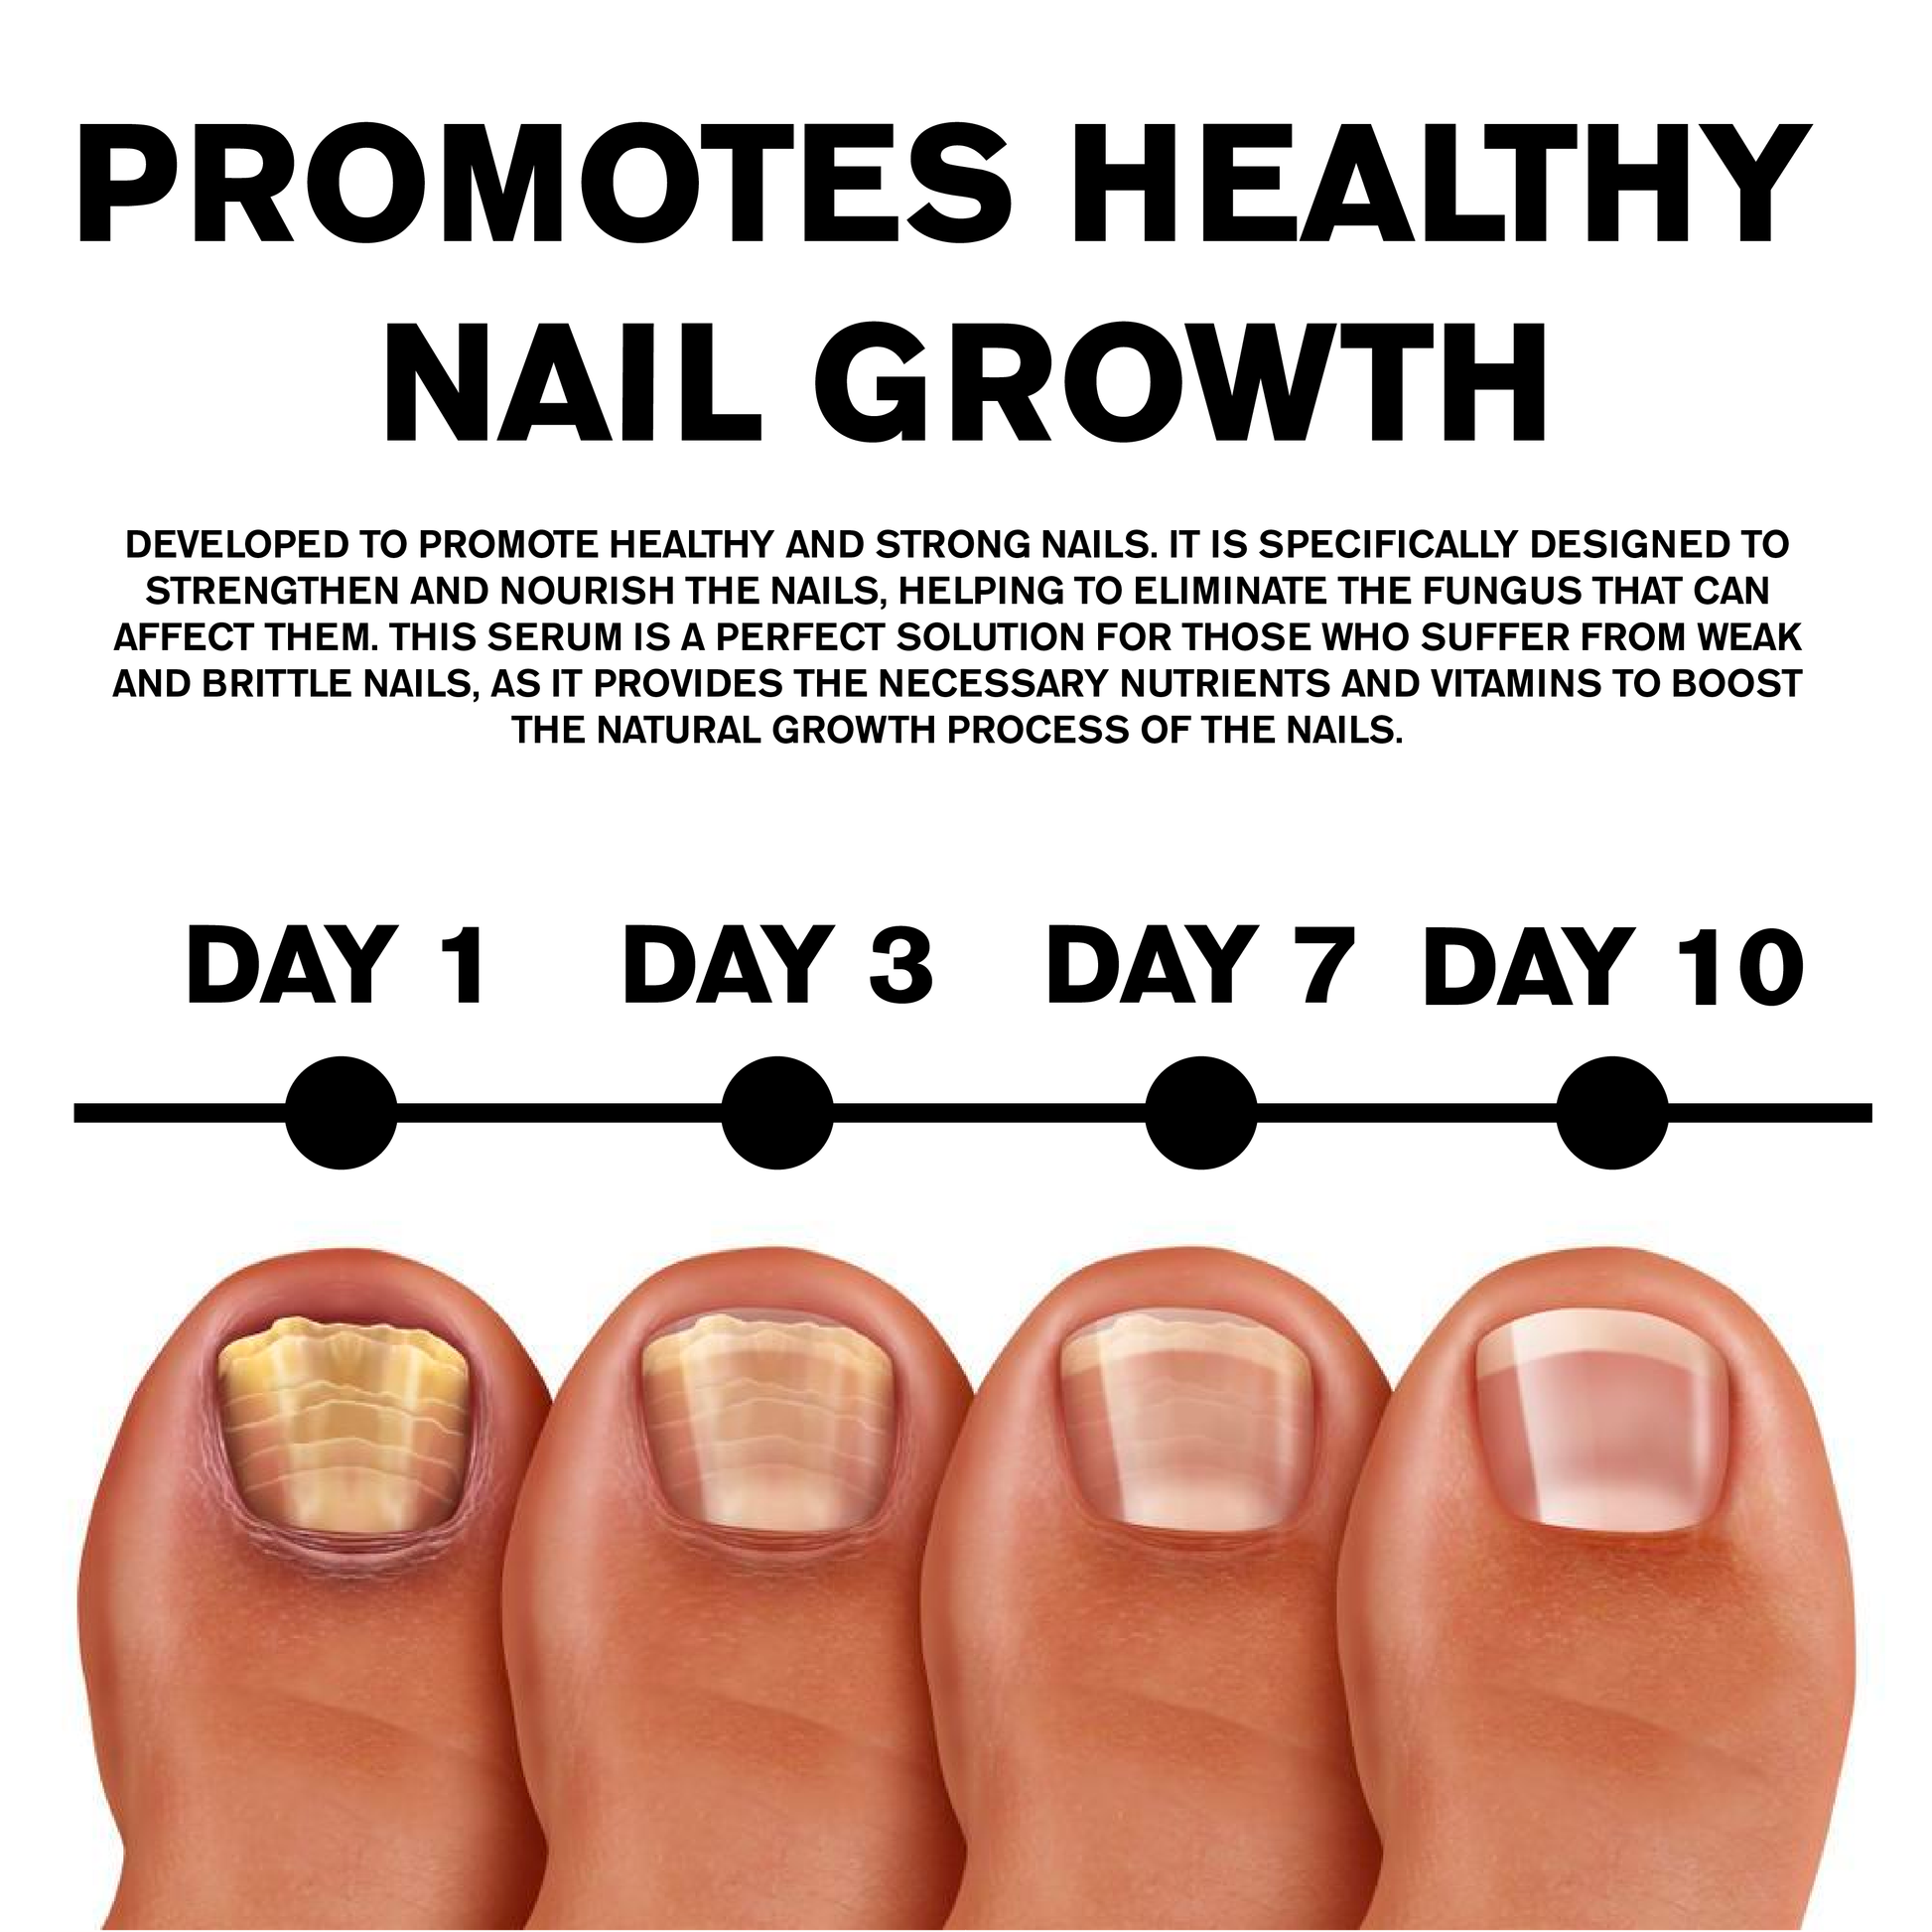 10 Foods That Promote And Strengthen Nail Growth